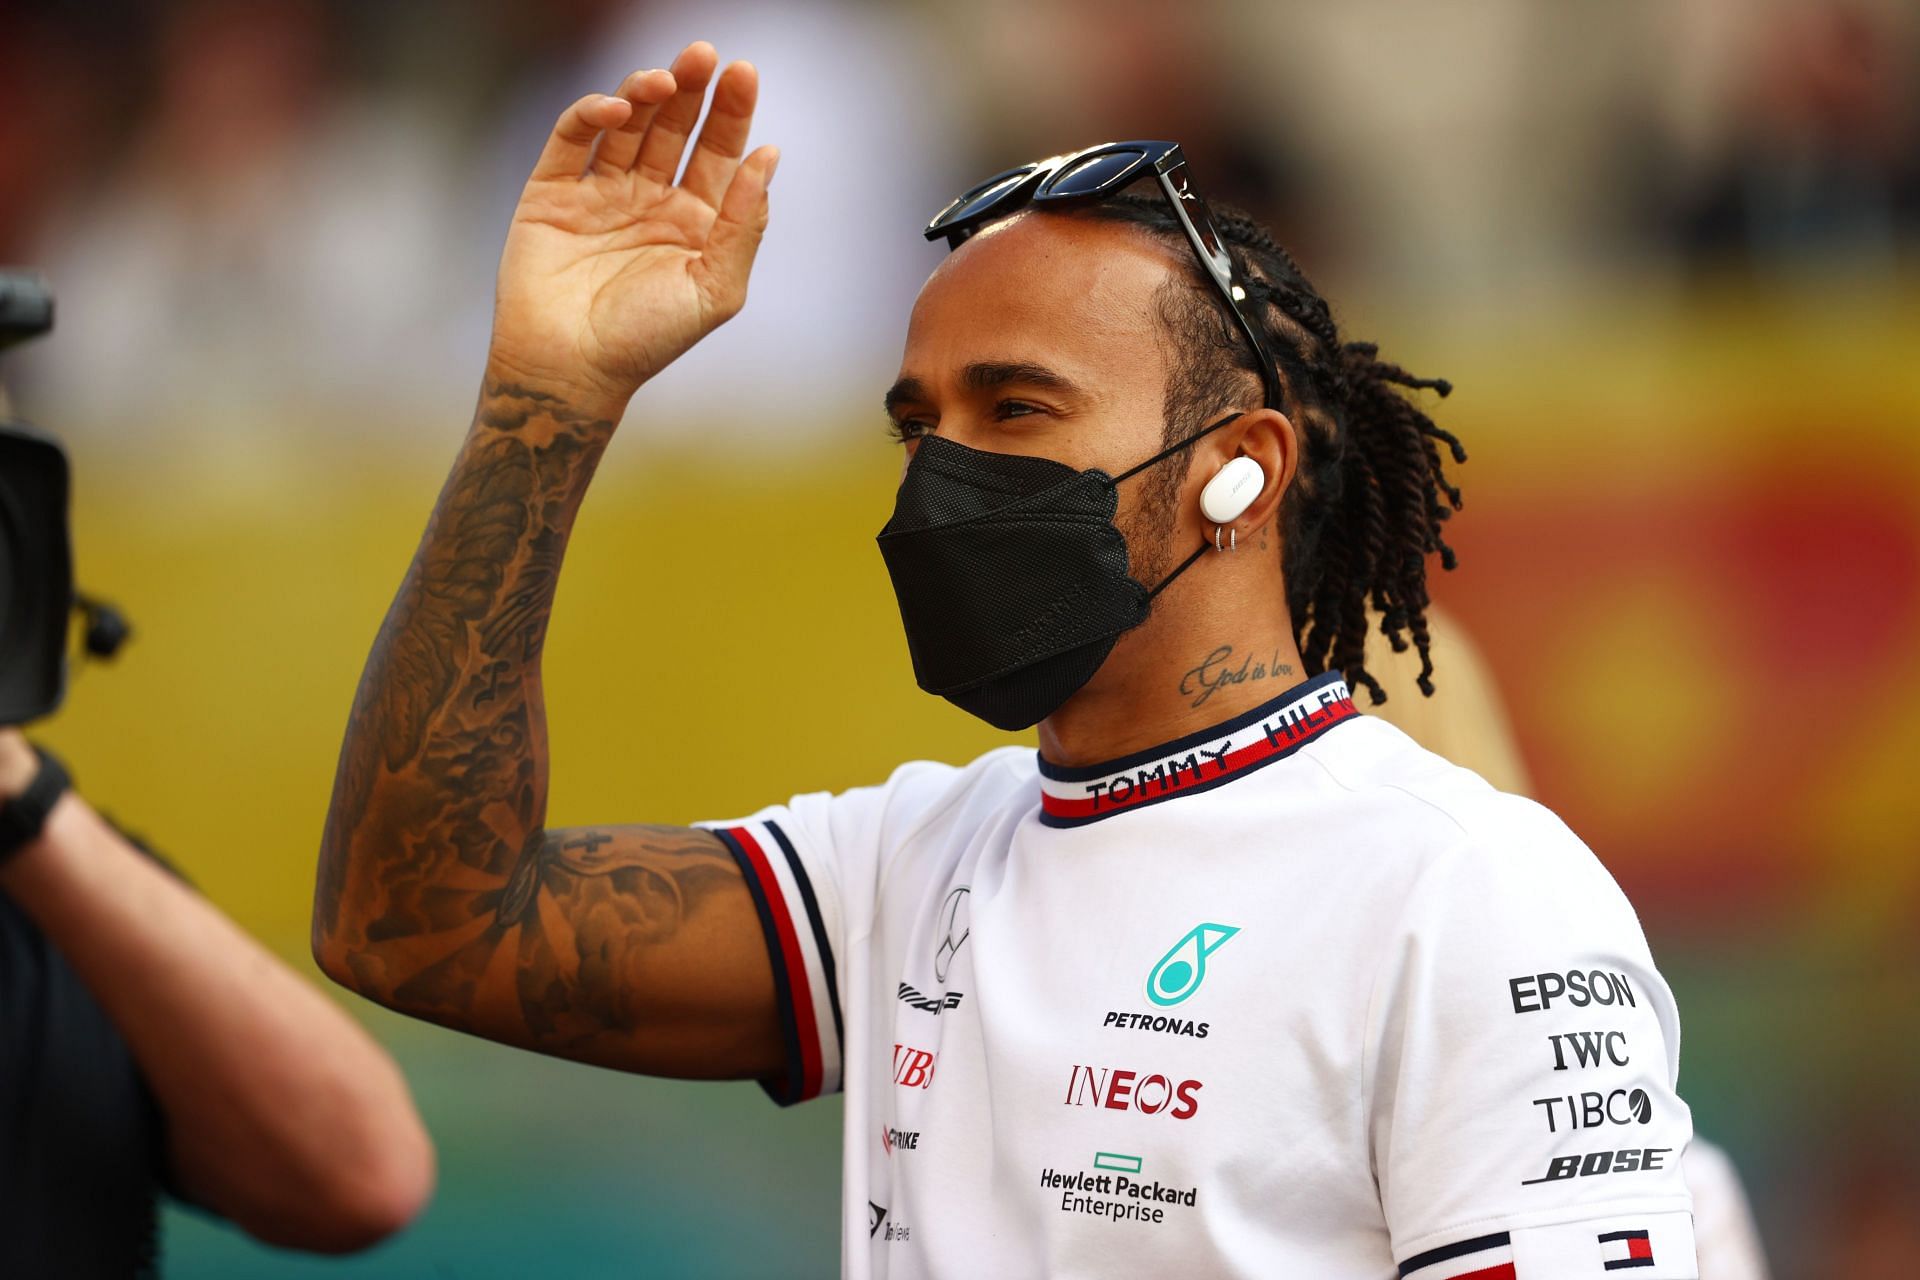 Lewis Hamilton before the 2021 Abu Dhabi Grand Prix (Photo by Clive Rose/Getty Images)